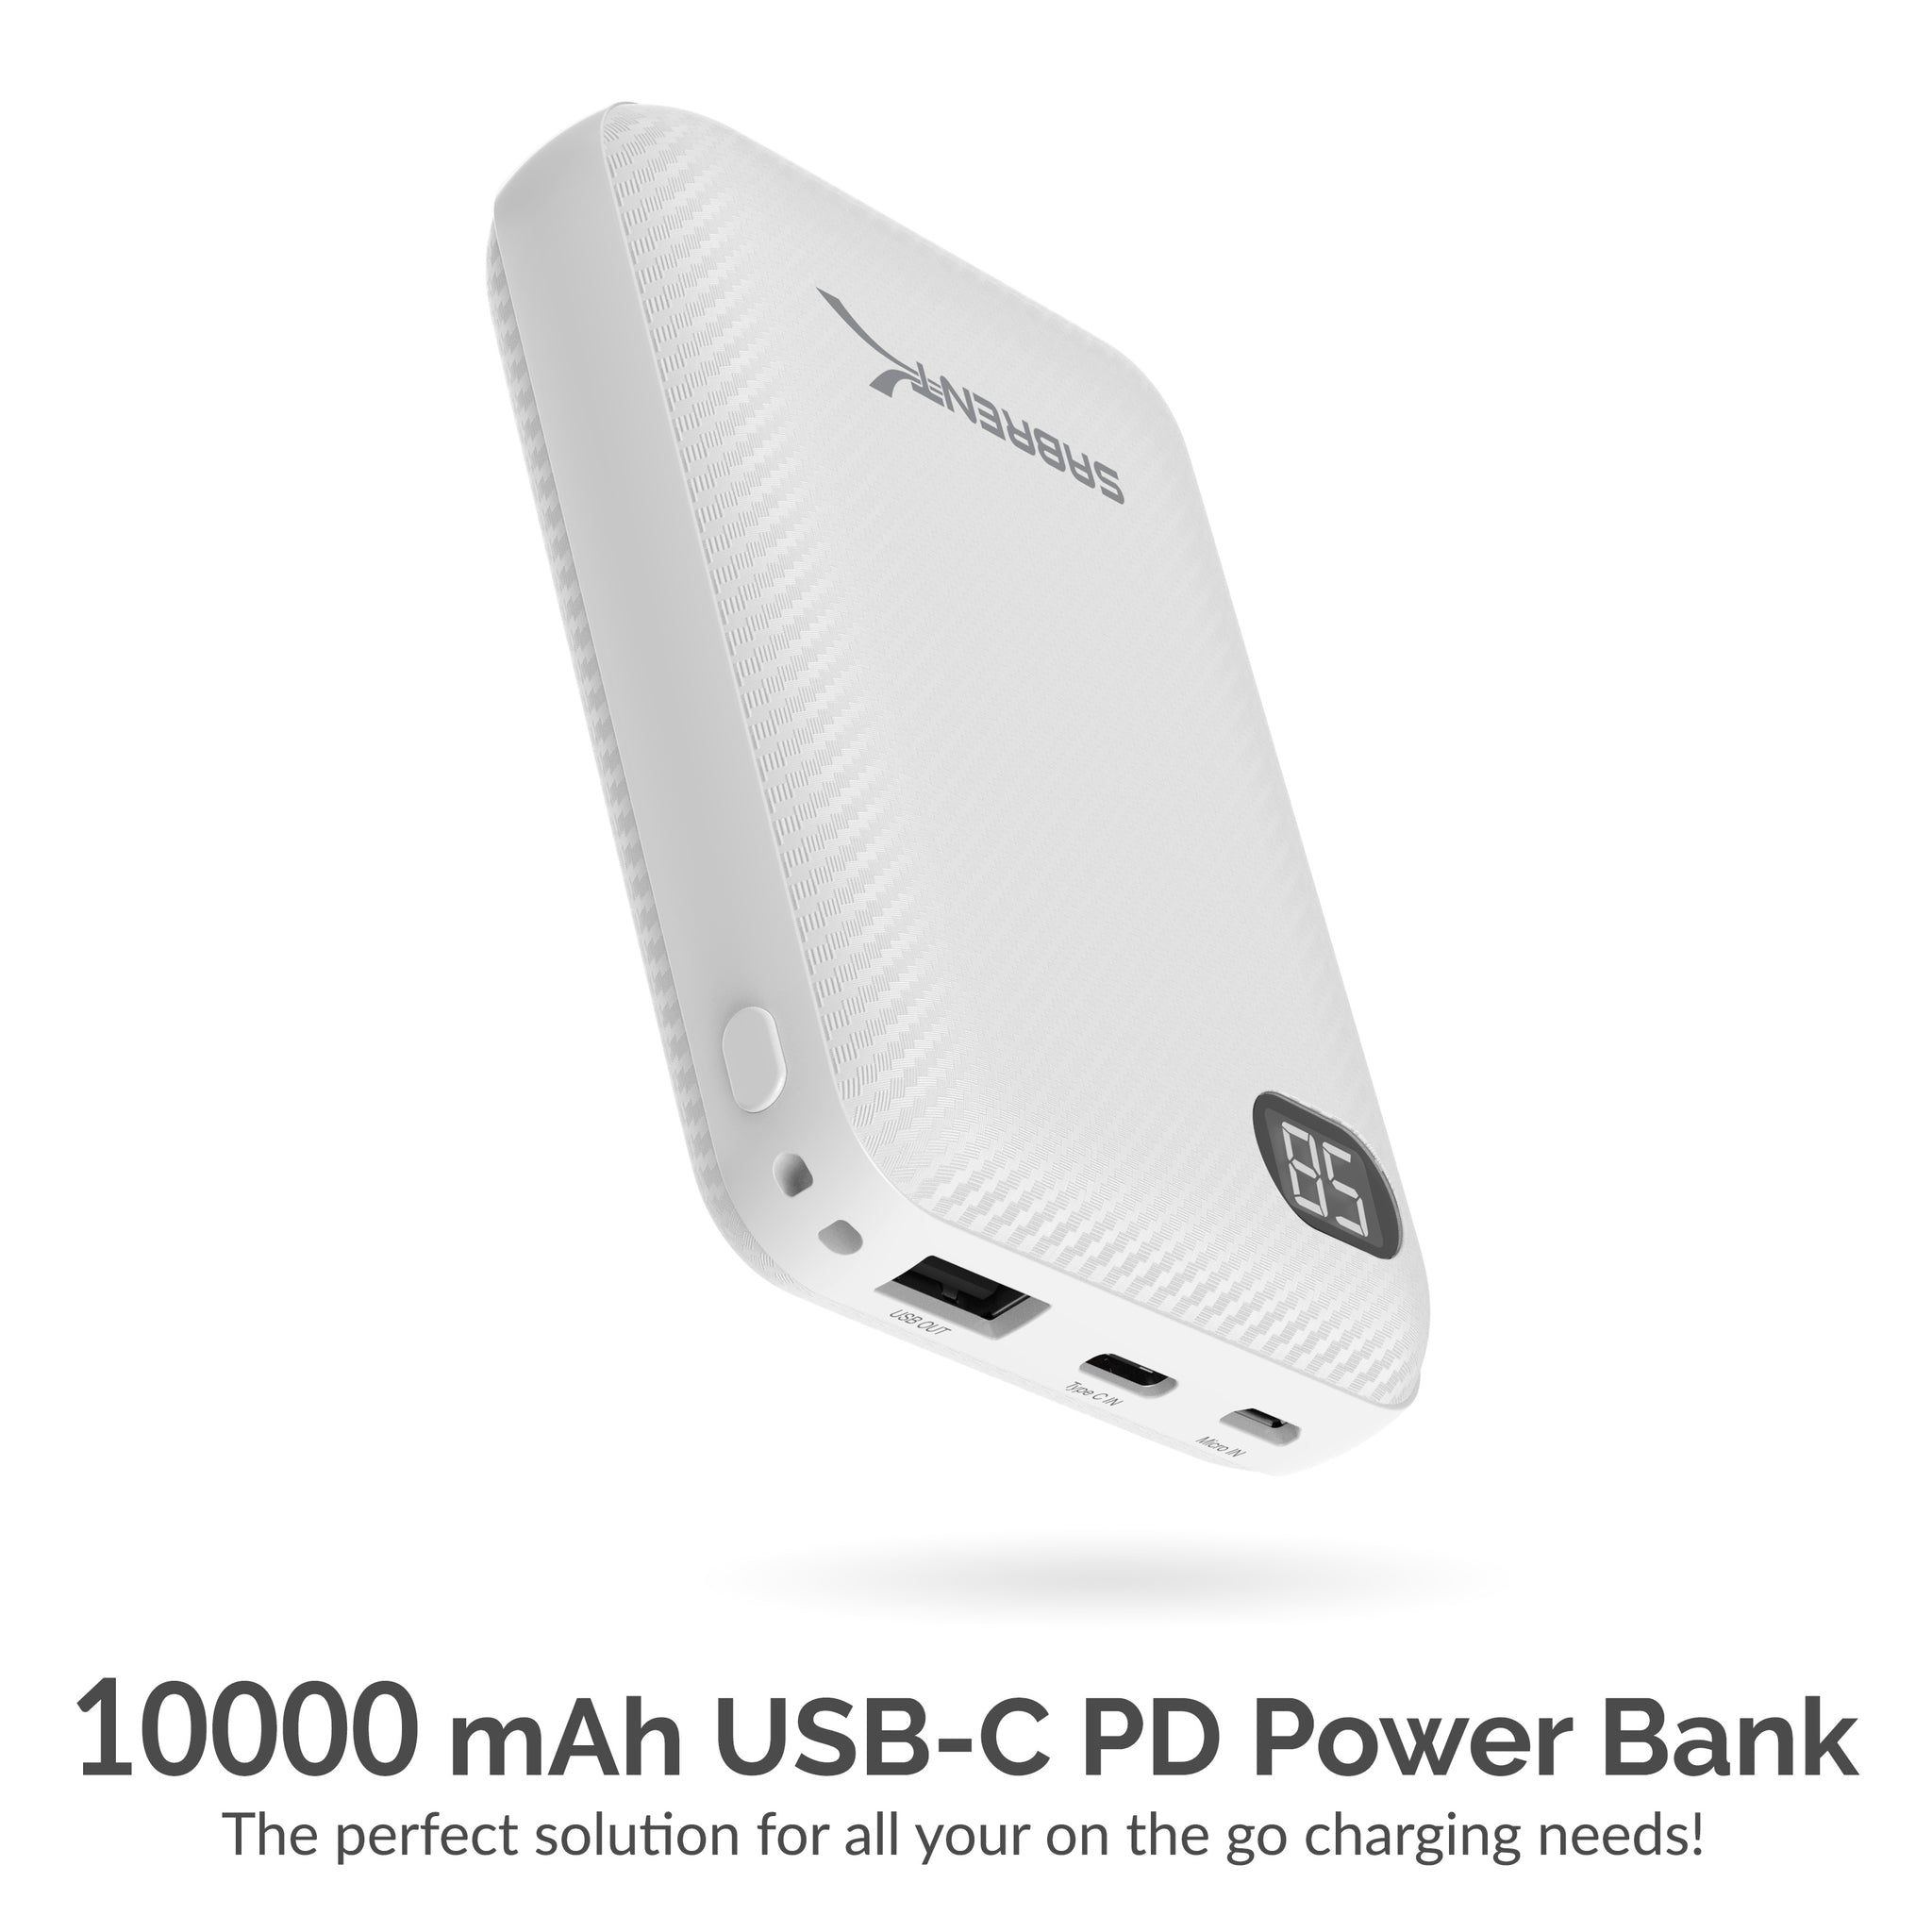 Is this the perfect USB power bank?